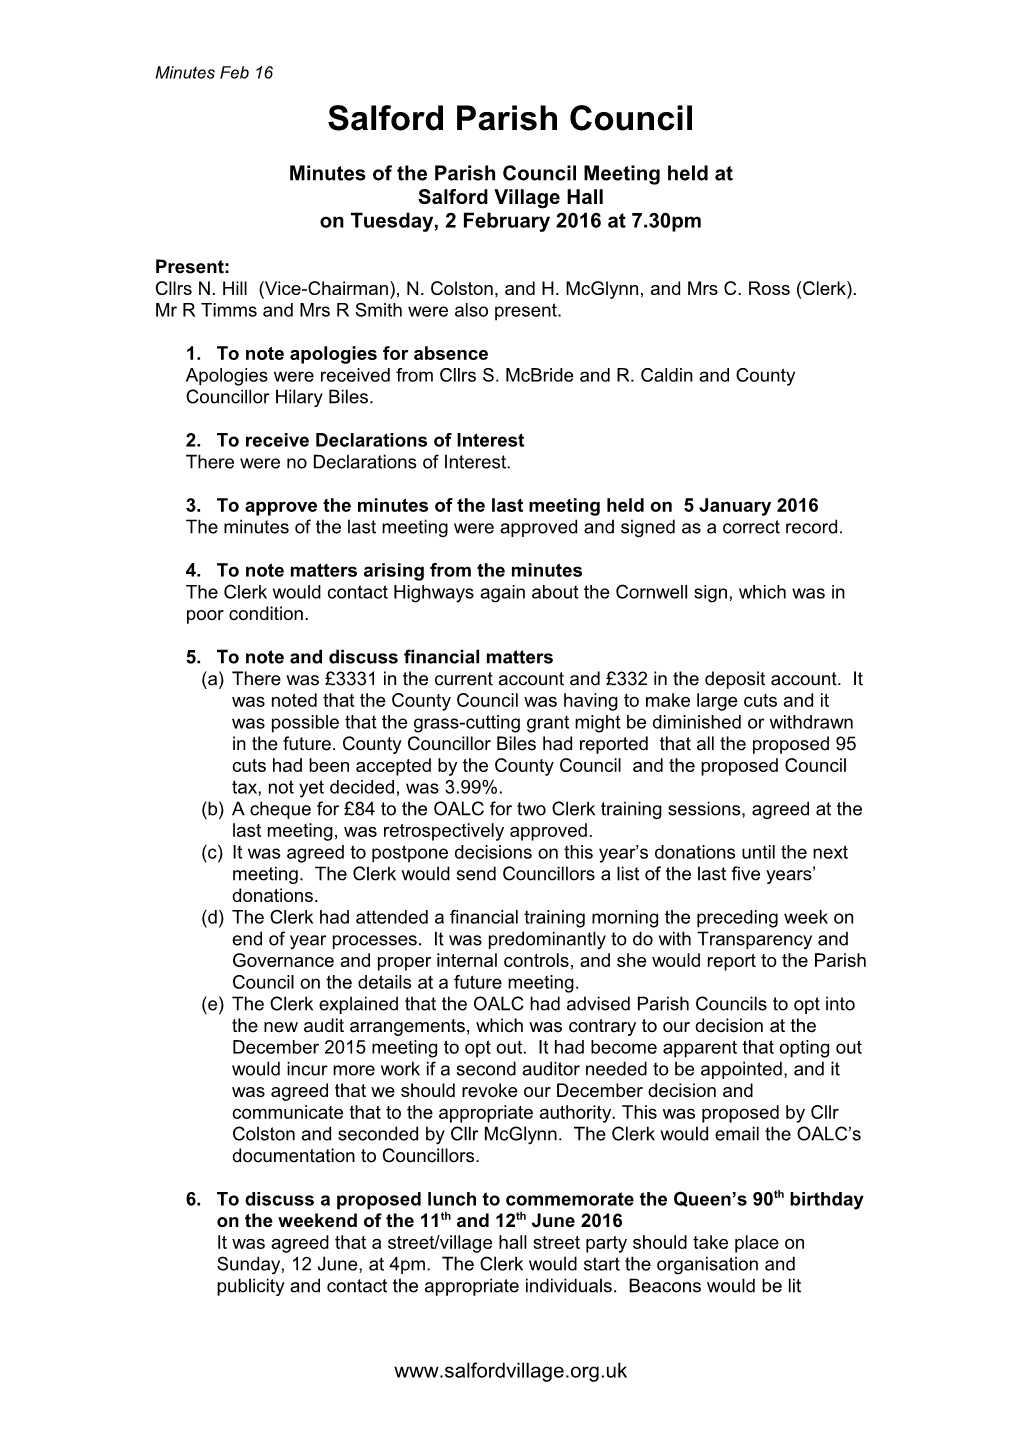 Minutes of the Parish Council Meeting Held At s2